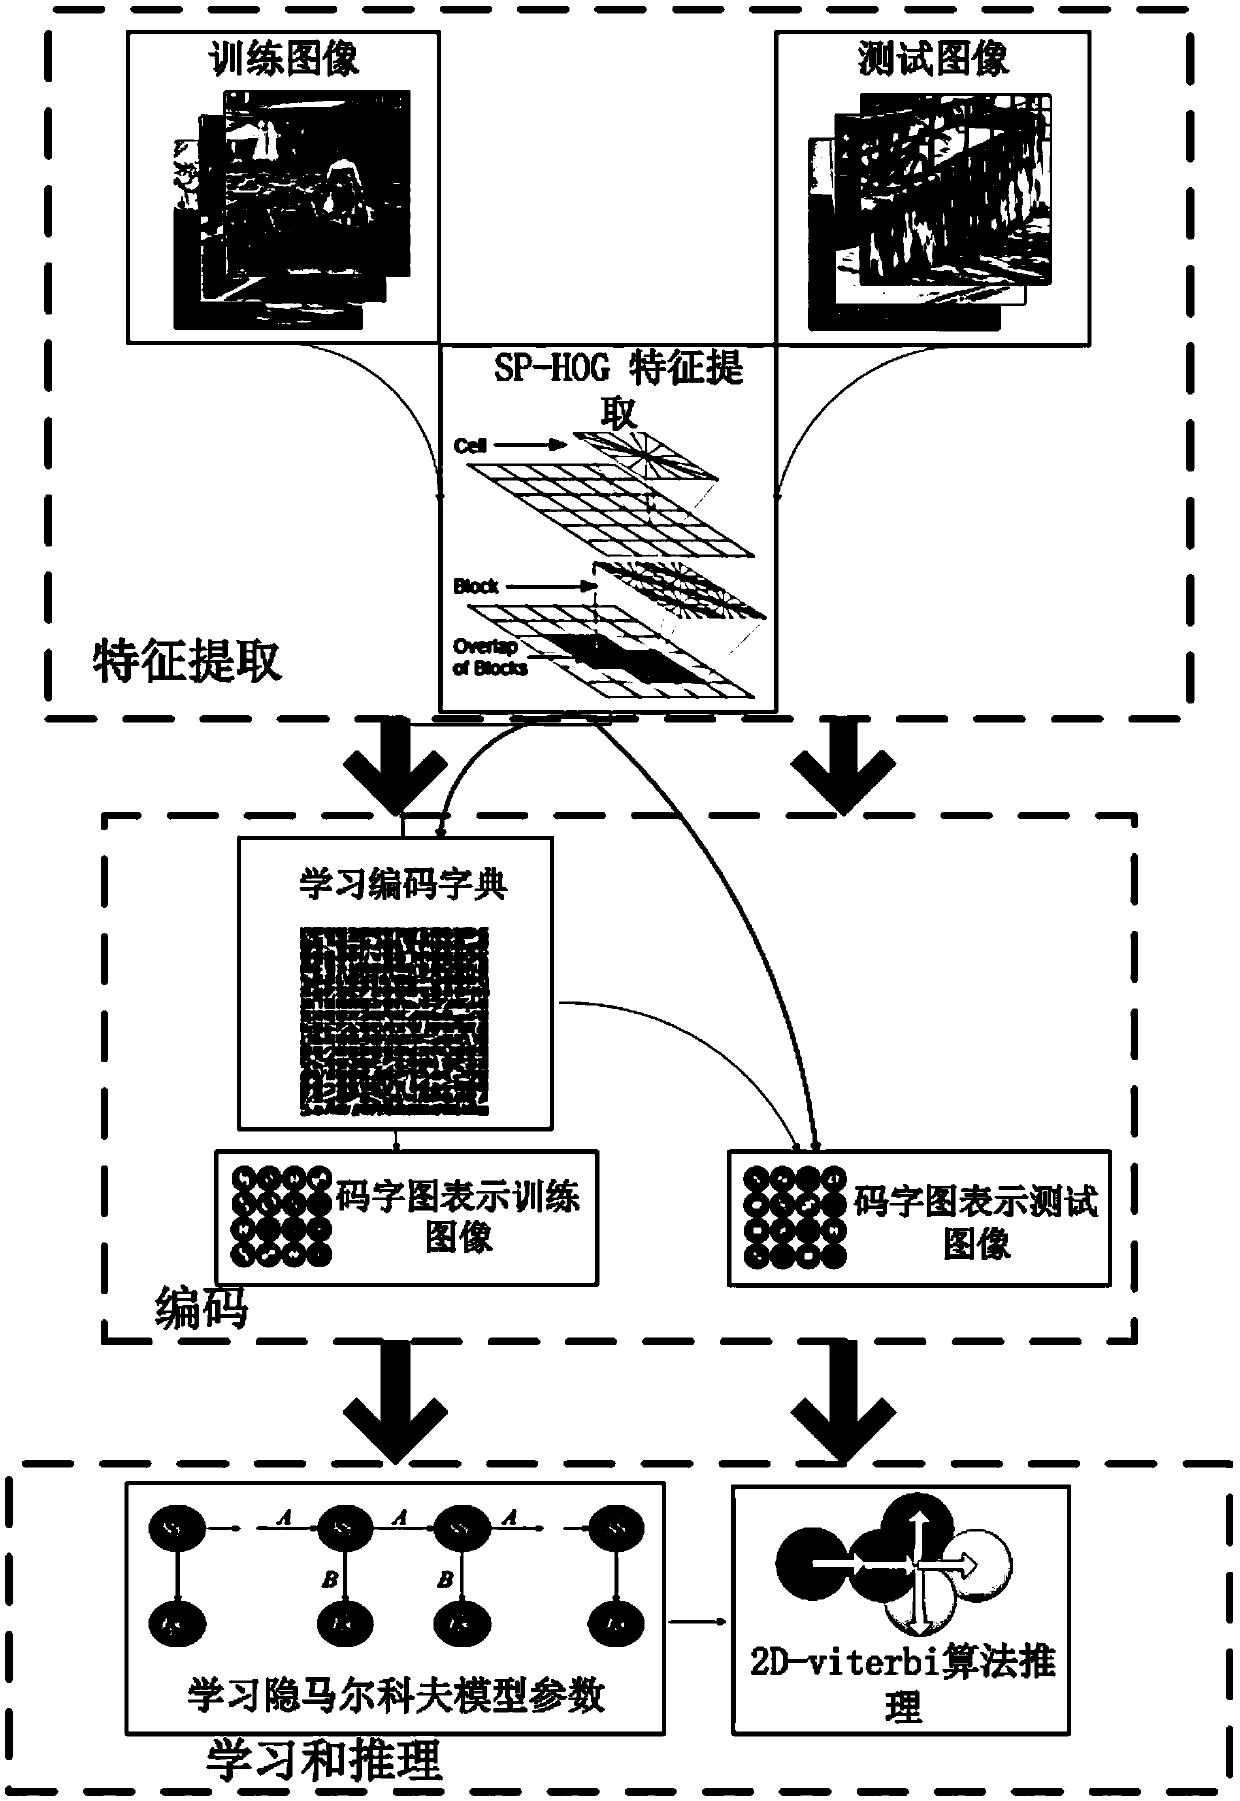 Method and system for realizing combined semantic hierarchical connection model based on panoramic area scene perception